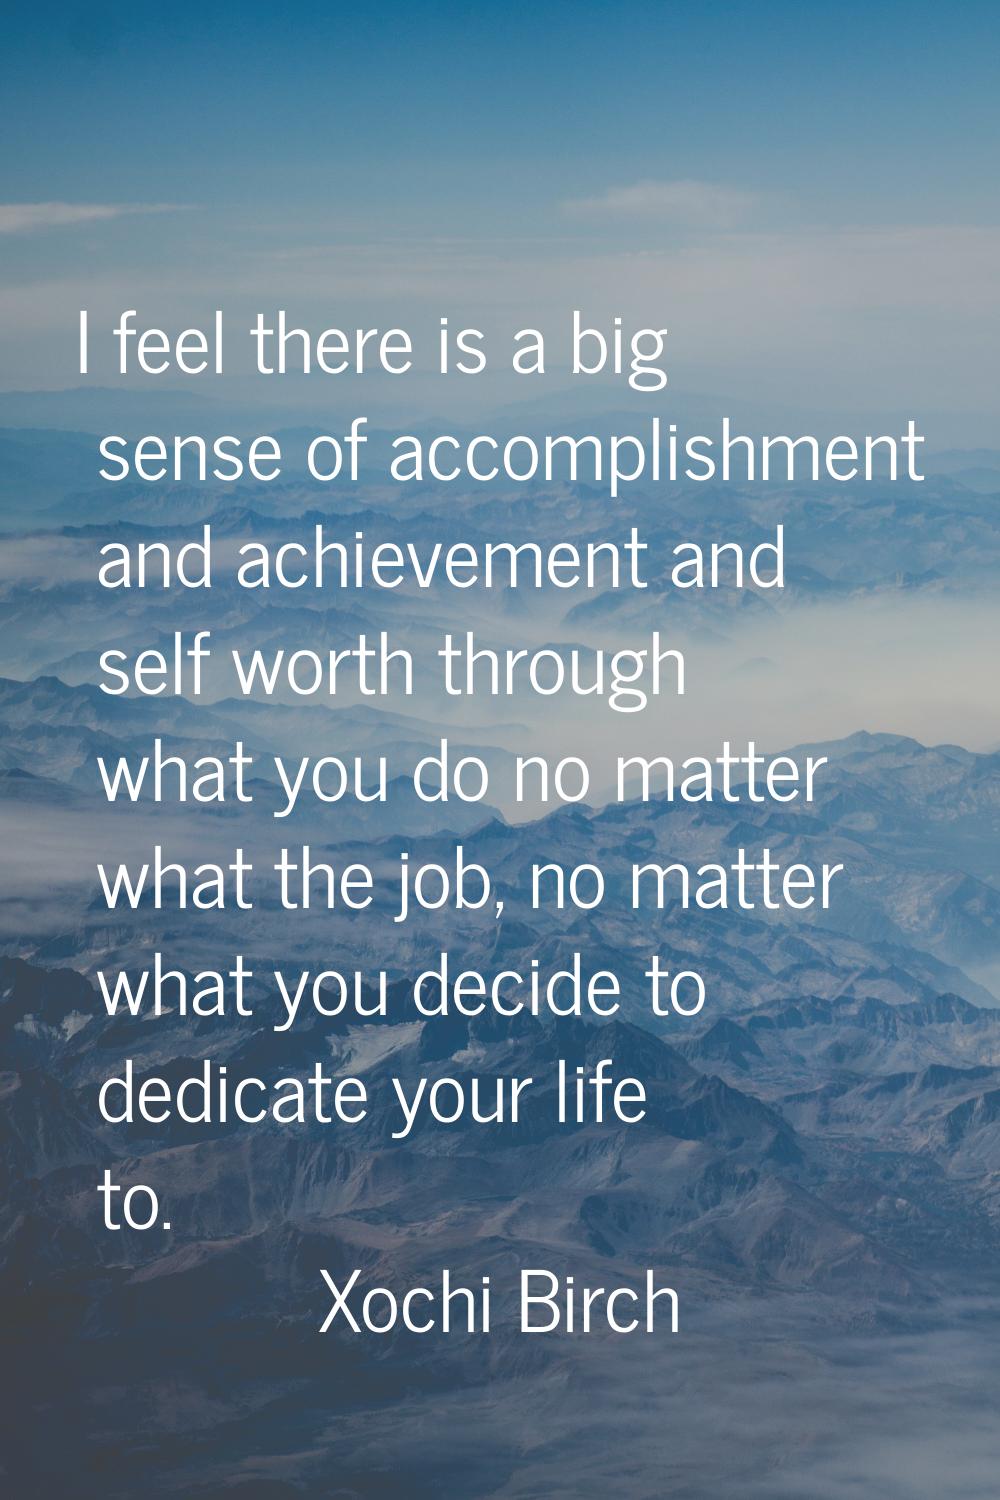 I feel there is a big sense of accomplishment and achievement and self worth through what you do no